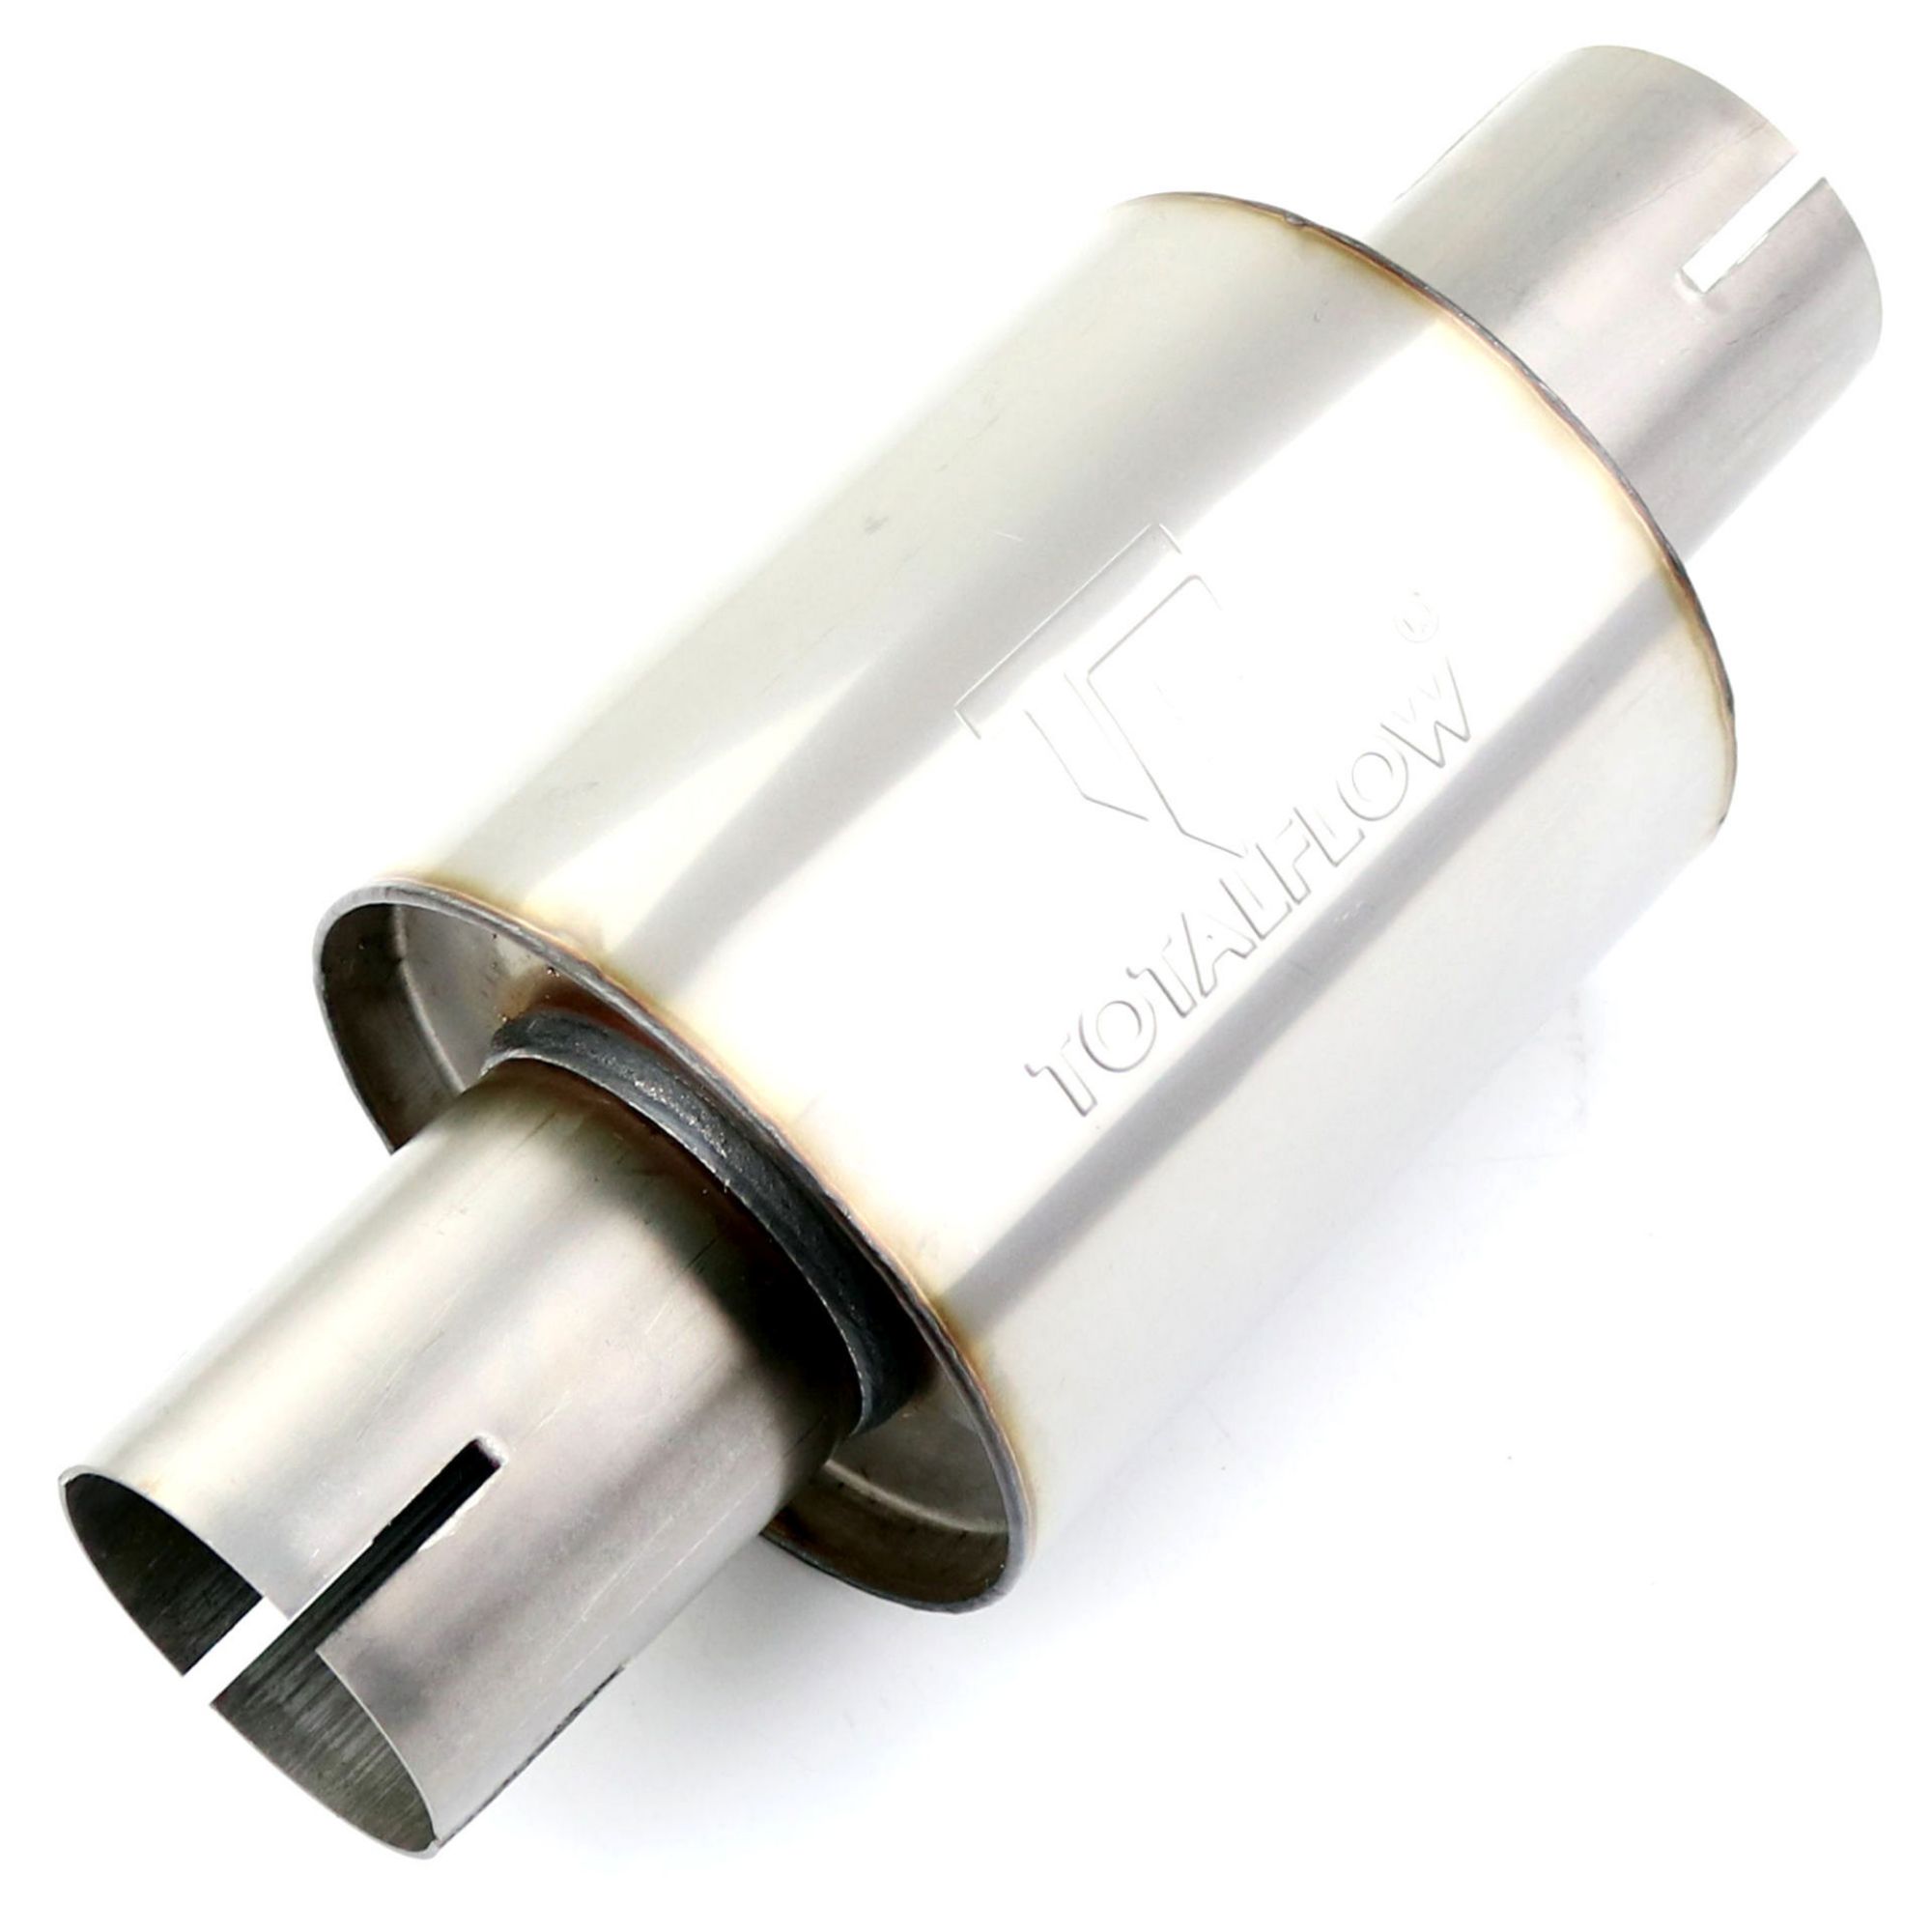 2.25 inch universal exhaust muffler, performance Muffler 2-1/4 Inch,  Straight Through Universal Exhaust performance Muffler, 2.25 Inch performance  Exhaust Muffler, Slotted Ends